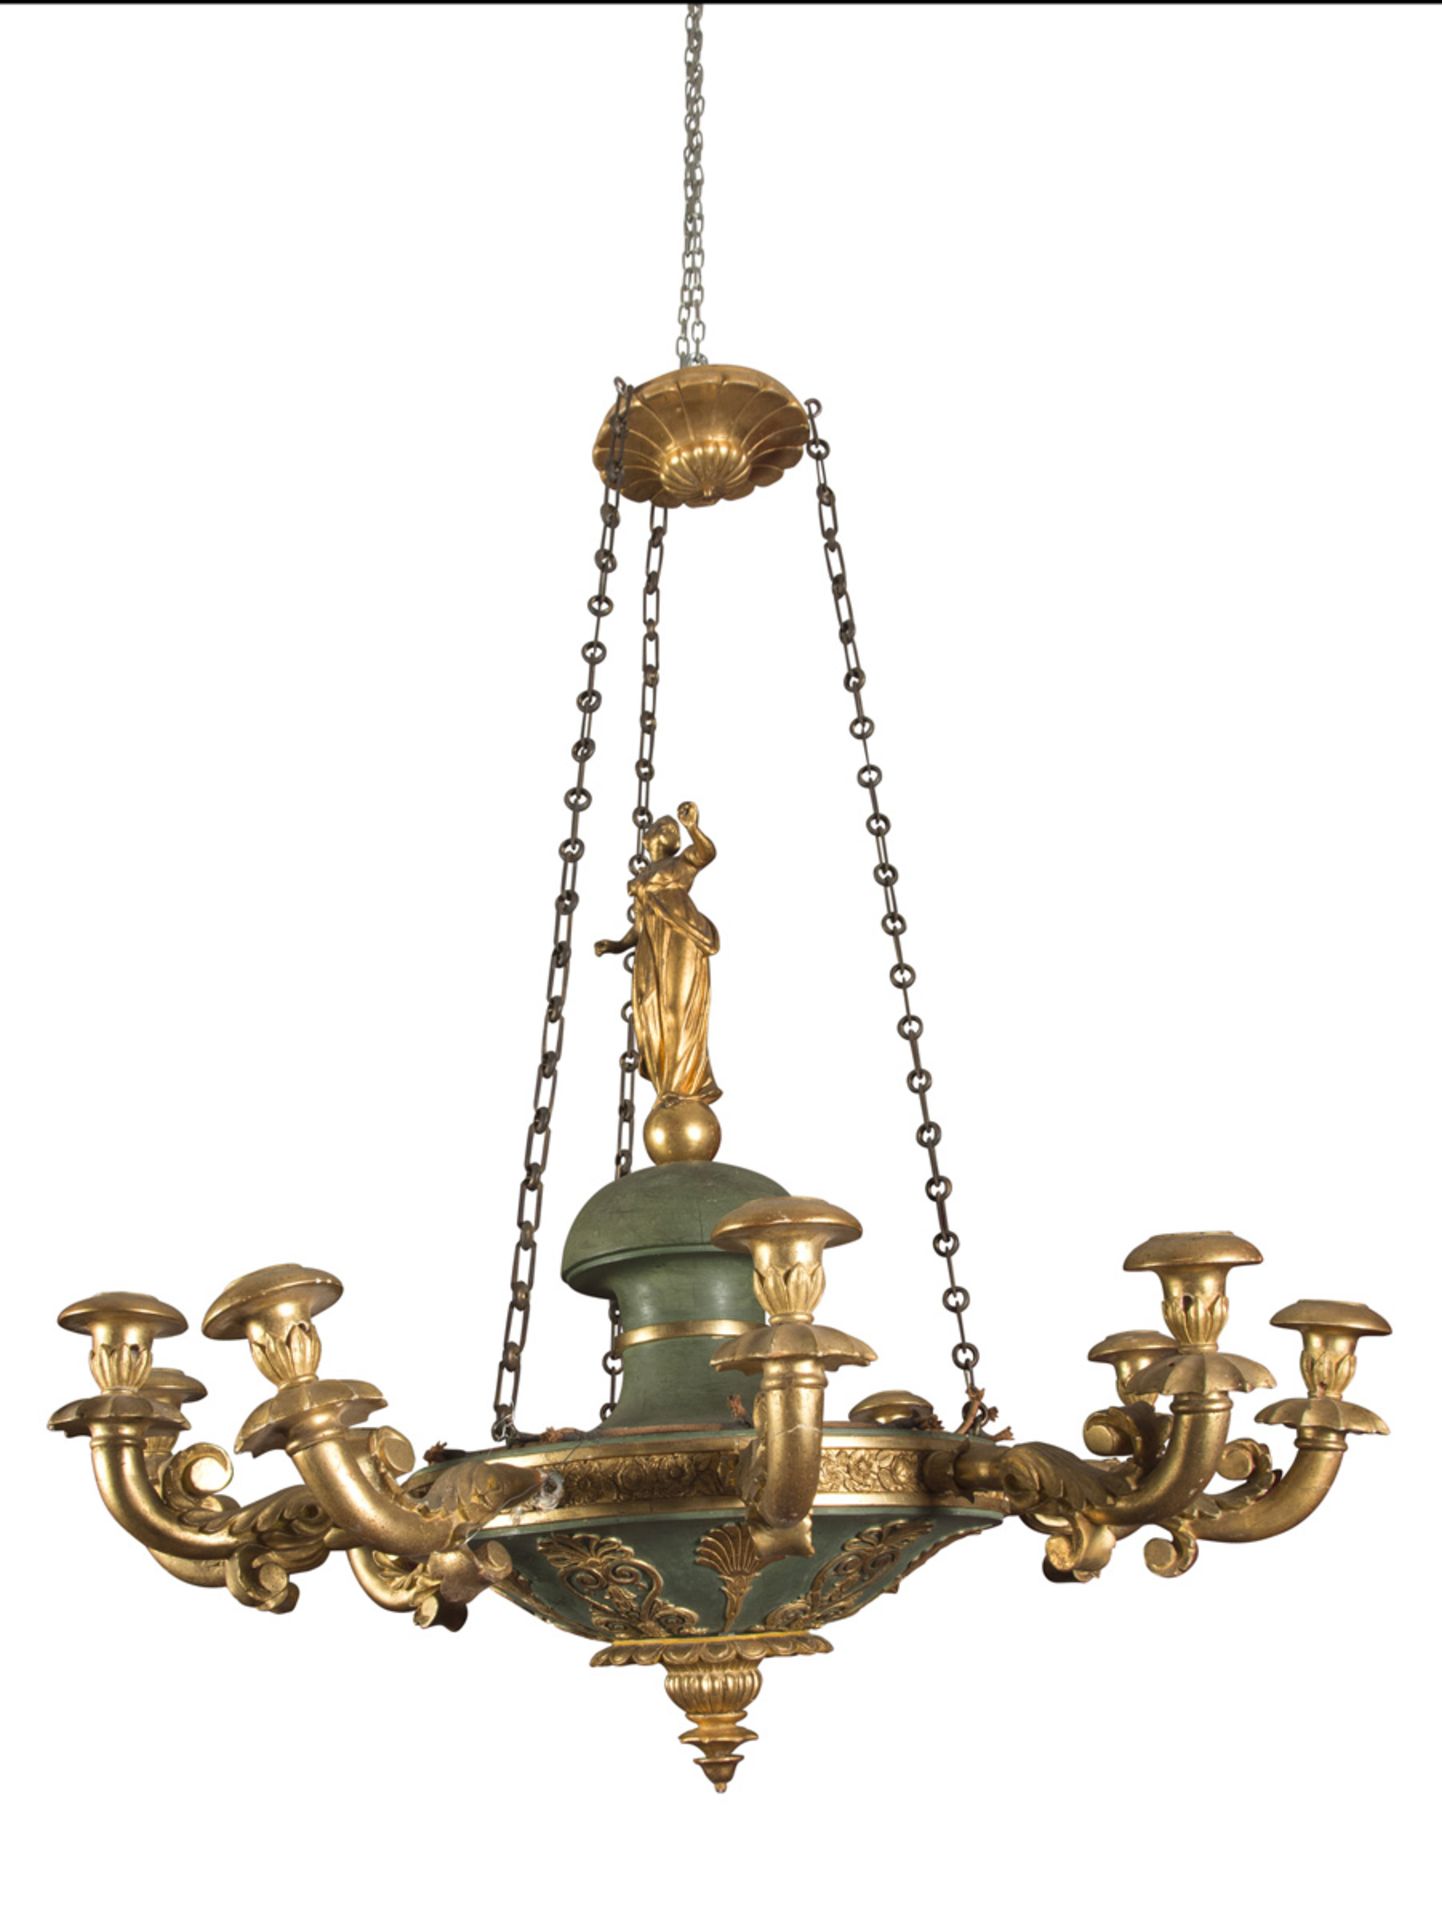 BEAUTIFUL CHANDELIER IN LACQUERED AND GILDED WOOD PROBABLY NAPLES EARLY 19TH CENTURY